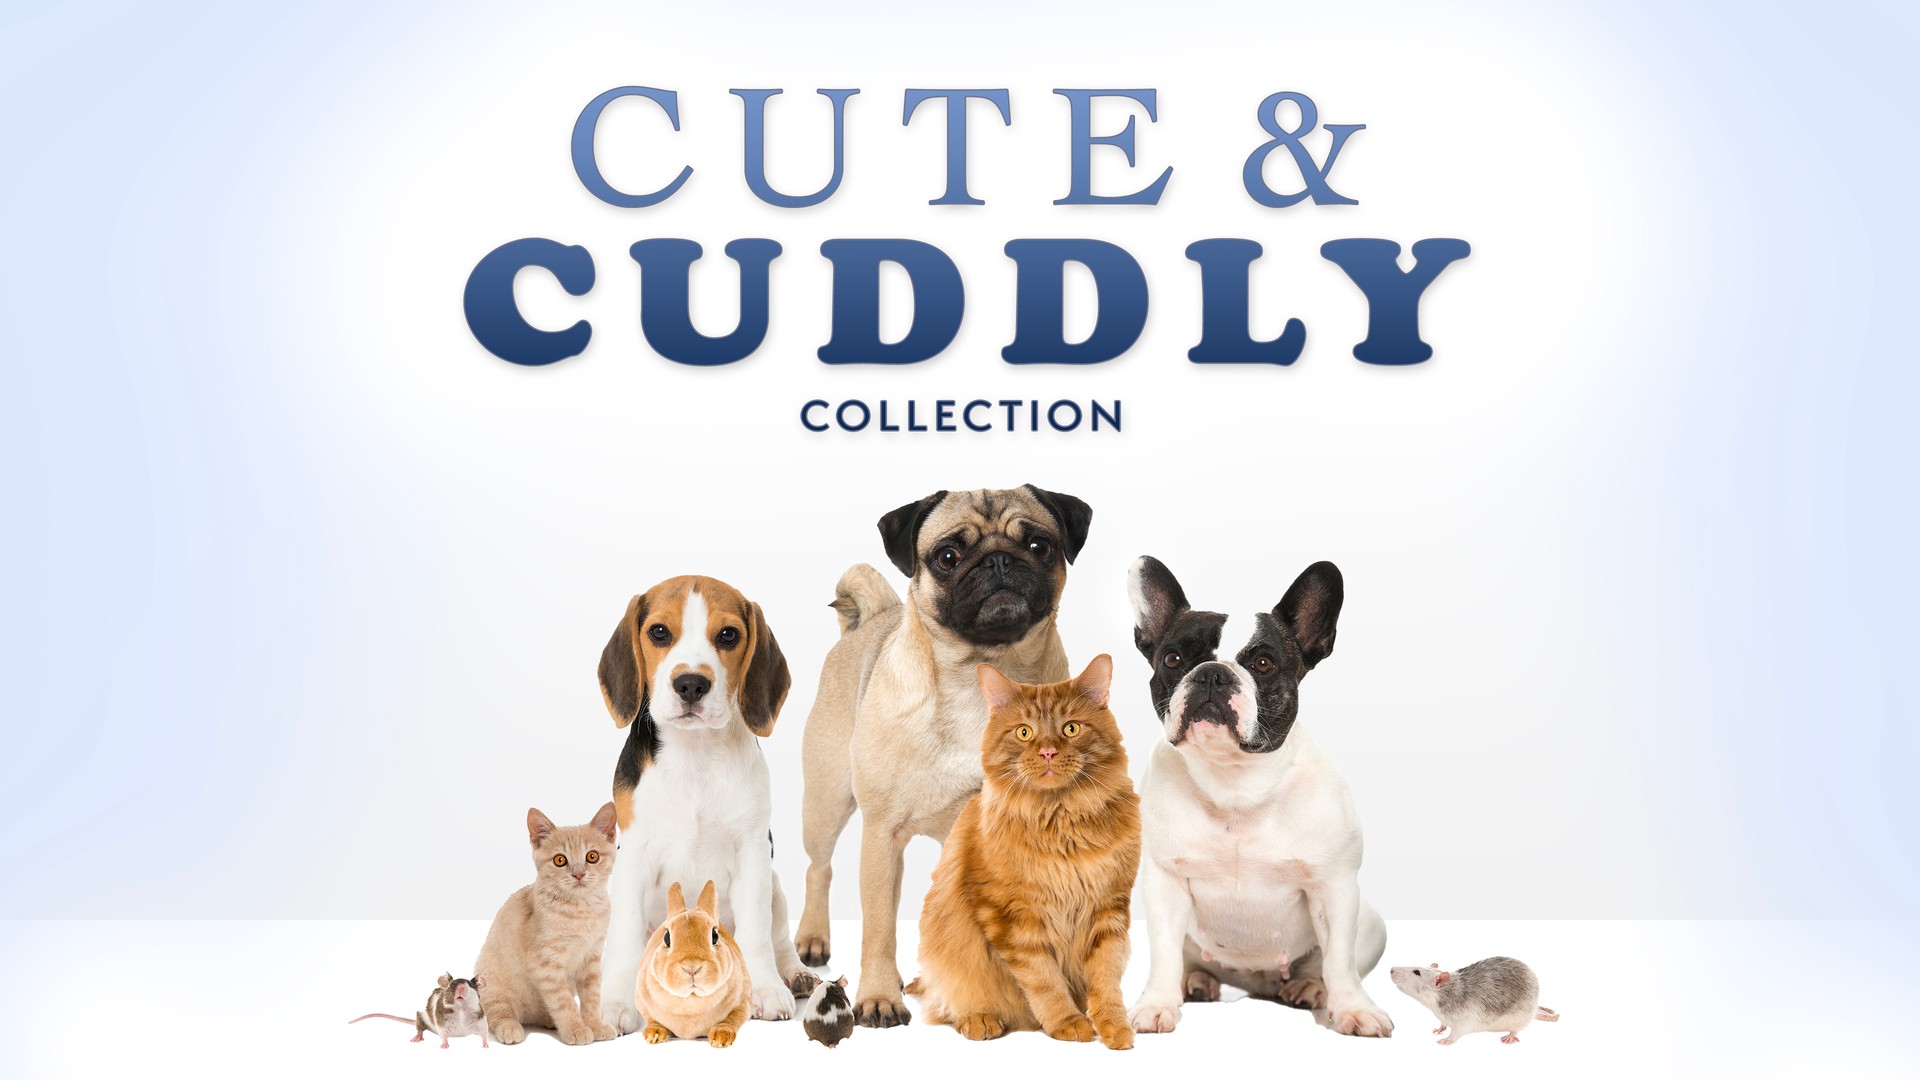 The Cute and Cuddly Collection